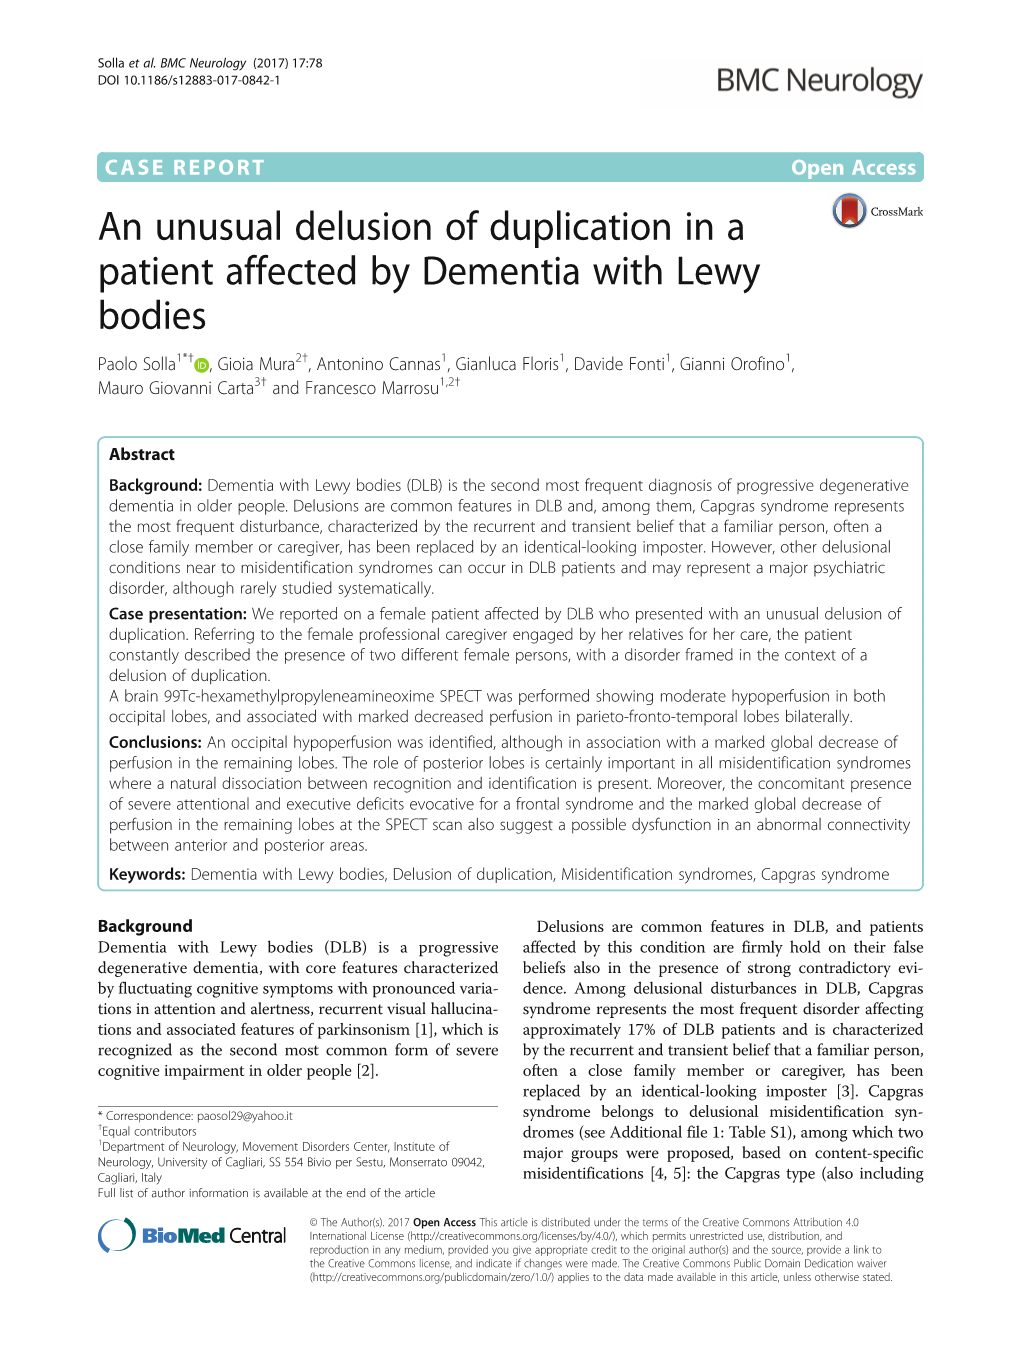 An Unusual Delusion of Duplication in a Patient Affected by Dementia With